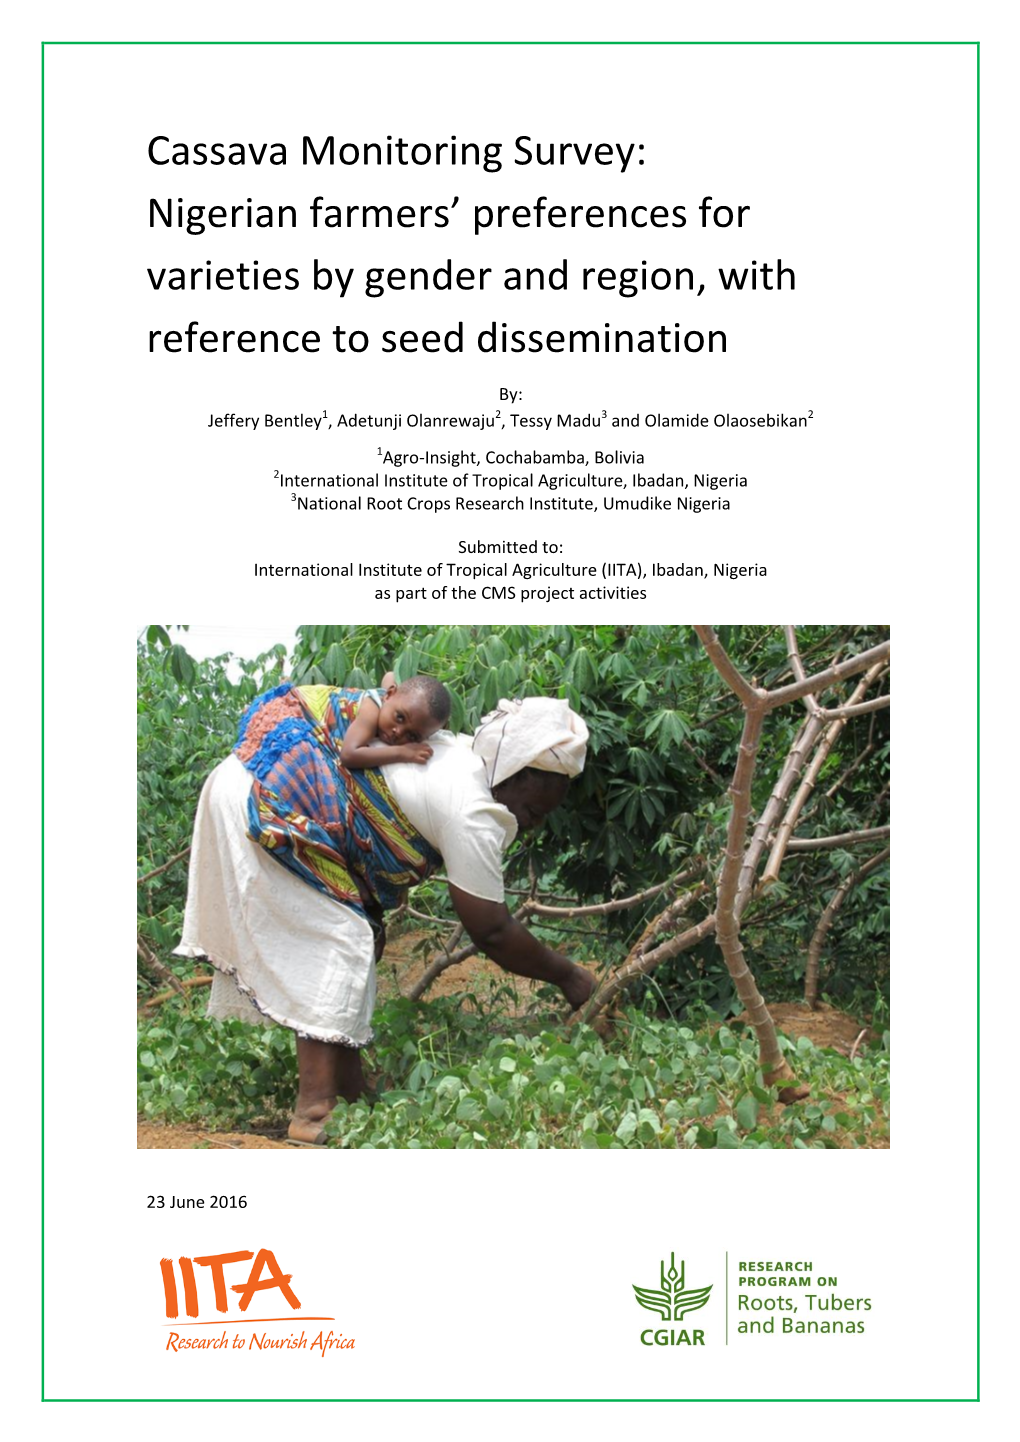 Cassava Monitoring Survey: Nigerian Farmers' Preferences for Varieties by Gender and Region, with Reference to Seed Dissemina